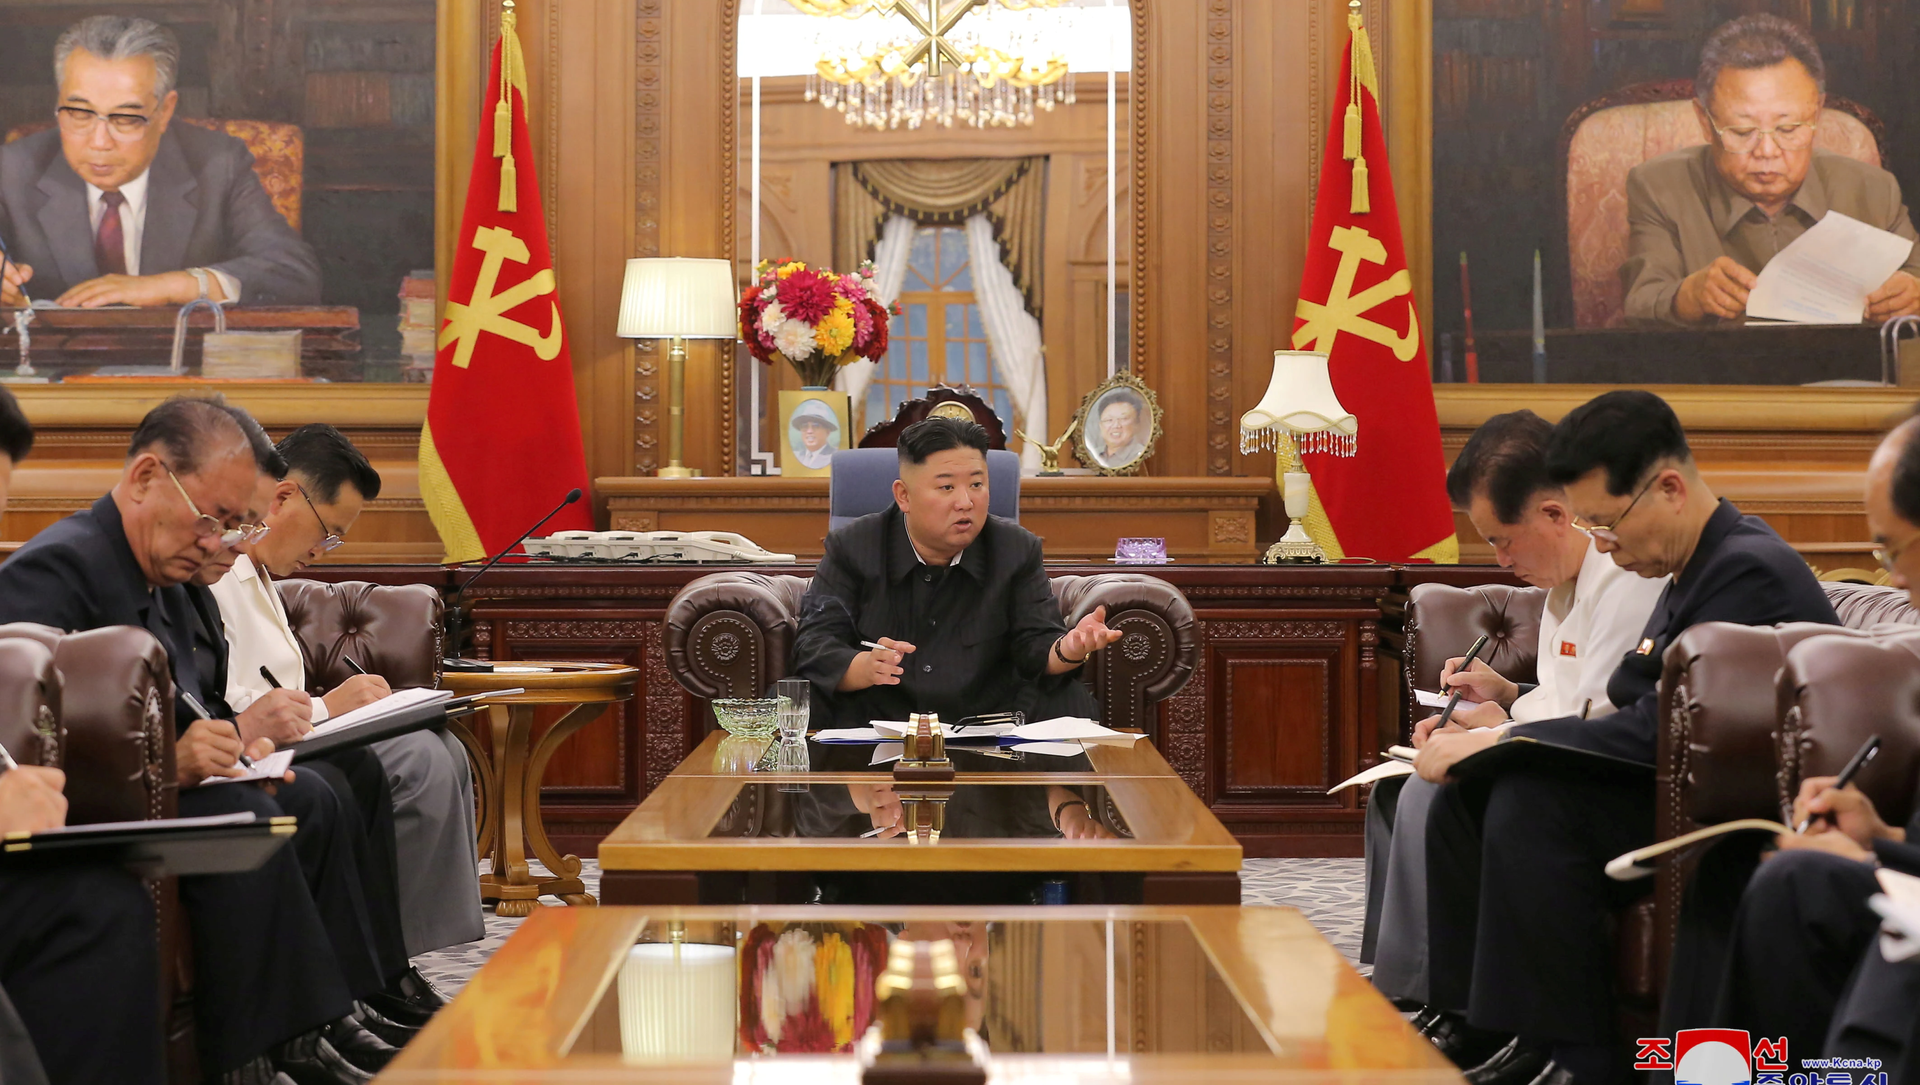  KCNA image of North Korean leader Kim Jong Un at a meeting with senior officials from the Workers' Party of Korea (WPK) Central Committee and Provincial Party Committees in Pyongyang, June 8, 2021. - Sputnik International, 1920, 13.07.2021